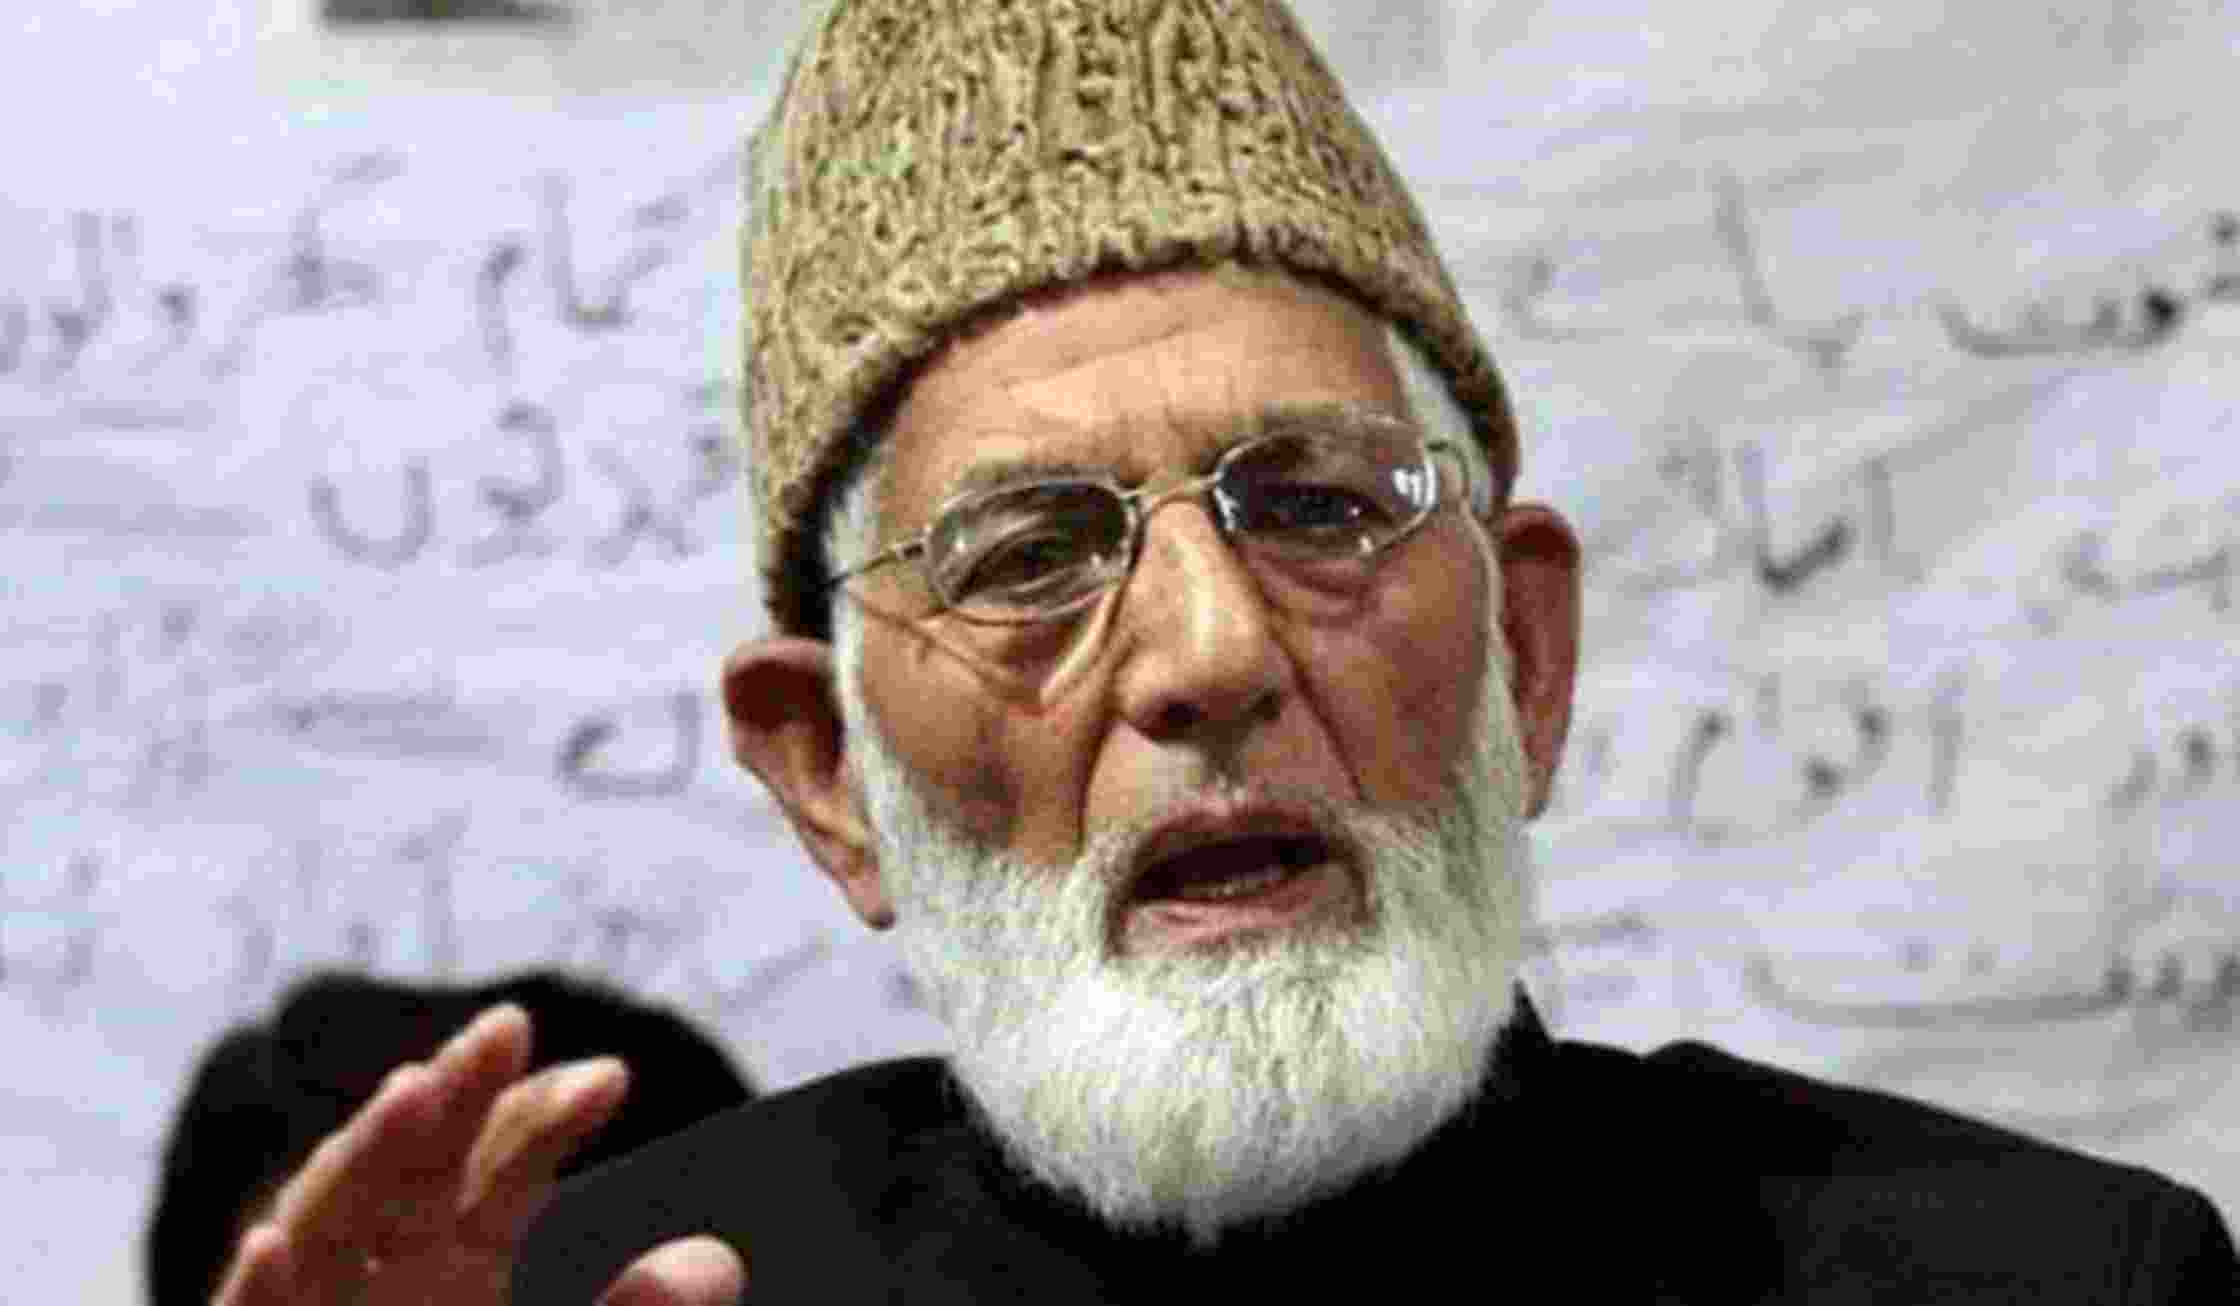 The ban on Tehreek-e-Hurriyat under the Unlawful Activities (Prevention) Act was confirmed on June 22 by a tribunal headed by Justice Sachin Datta of the Delhi High Court. Another tribunal led by Justice Datta confirmed the ban on the Muslim League Jammu and Kashmir (Masrat Alam faction) under the UAPA.